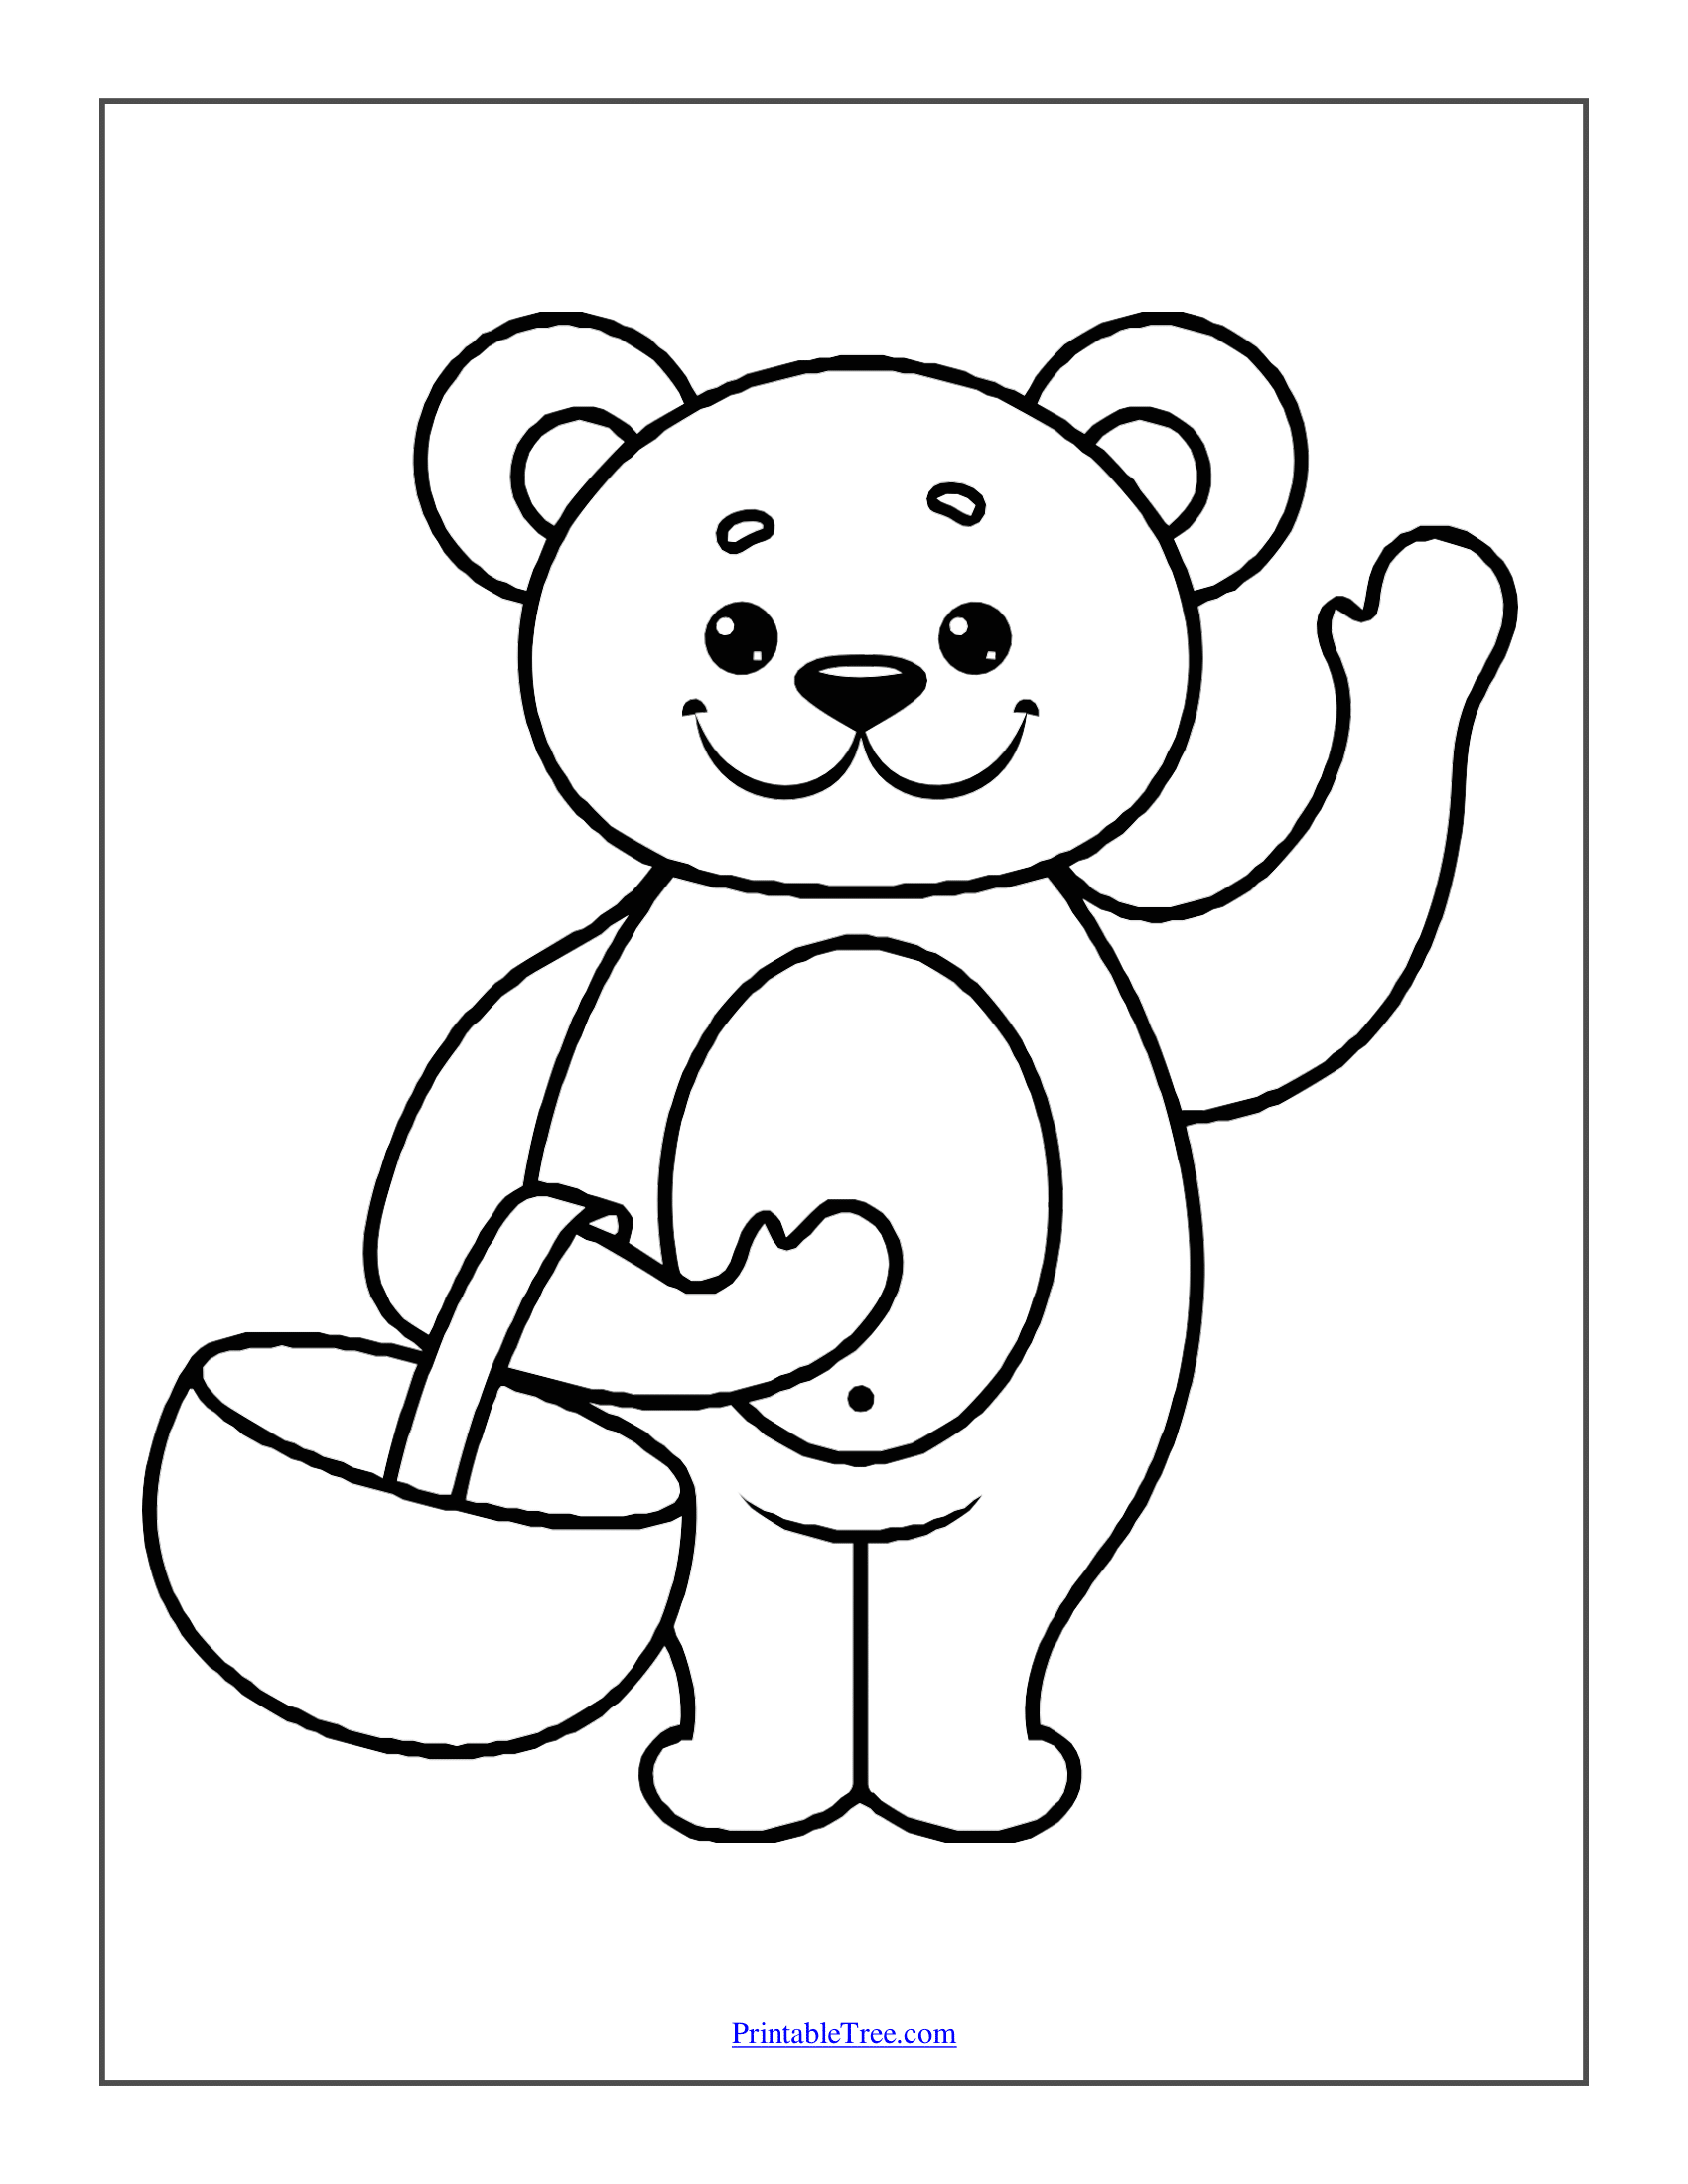 Free printable bear coloring pages pdf for kids and adults